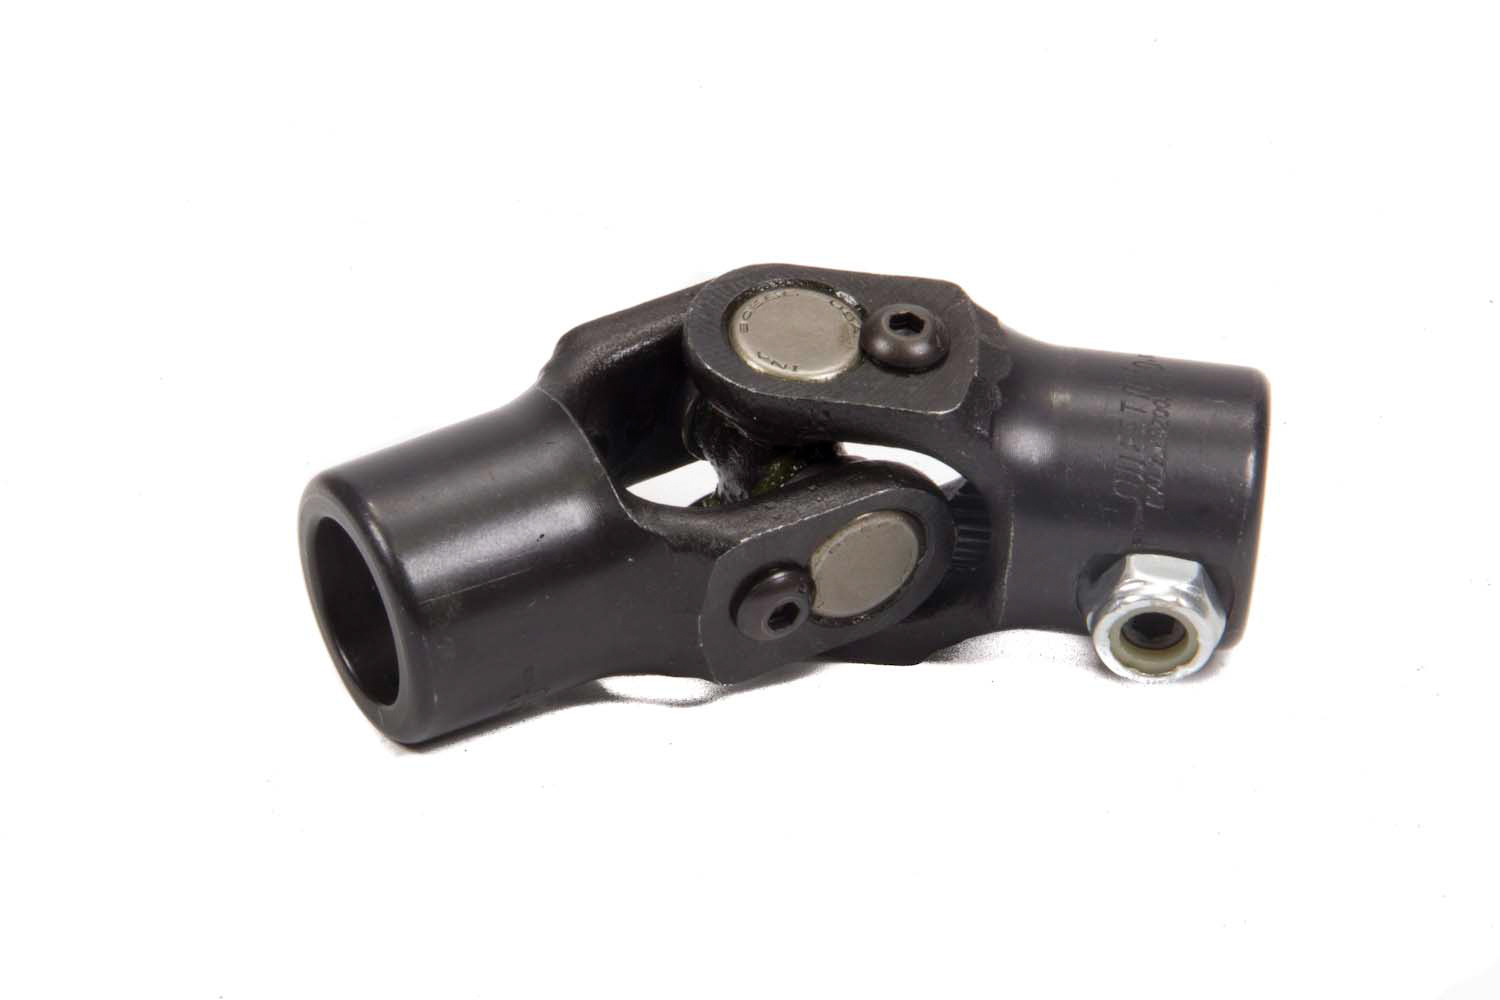 Sweet Manufacturing 401-50808 Steering Universal Joint, Single Joint, 5/8 in Smooth Bore to 5/8 in Smooth Bore, Steel, Black Paint, Each